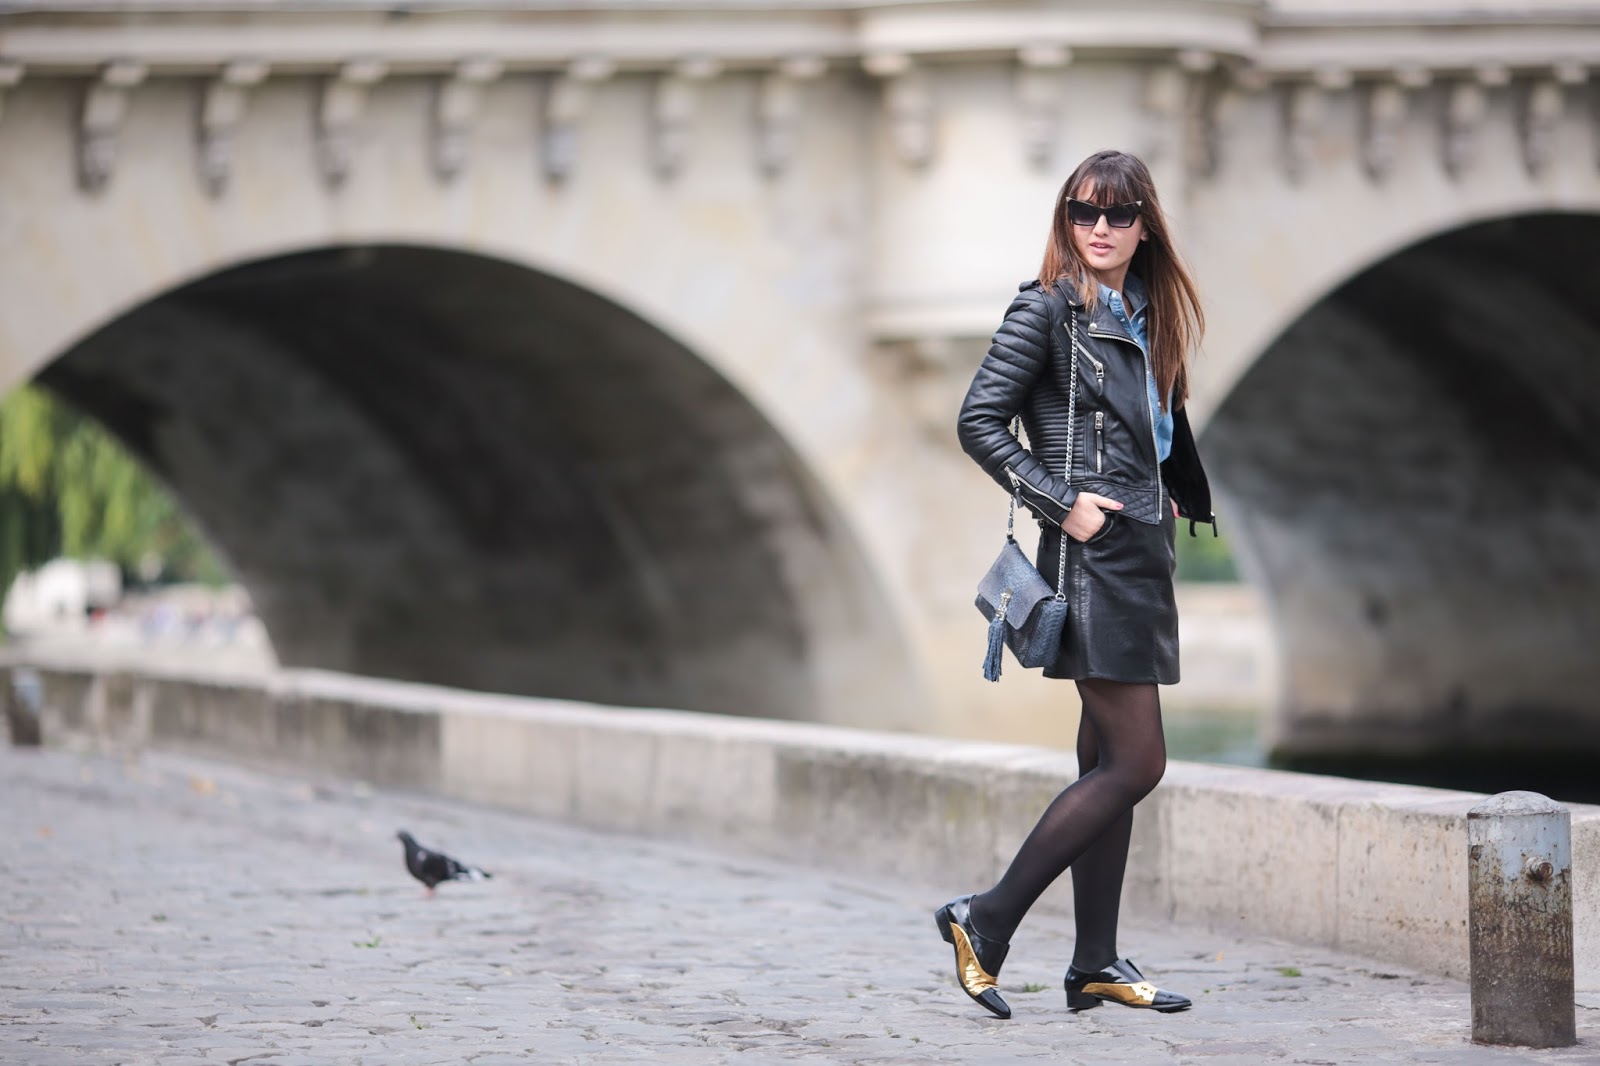 Meet Me In Paree: Stop being windy… I want the perfect Photo!